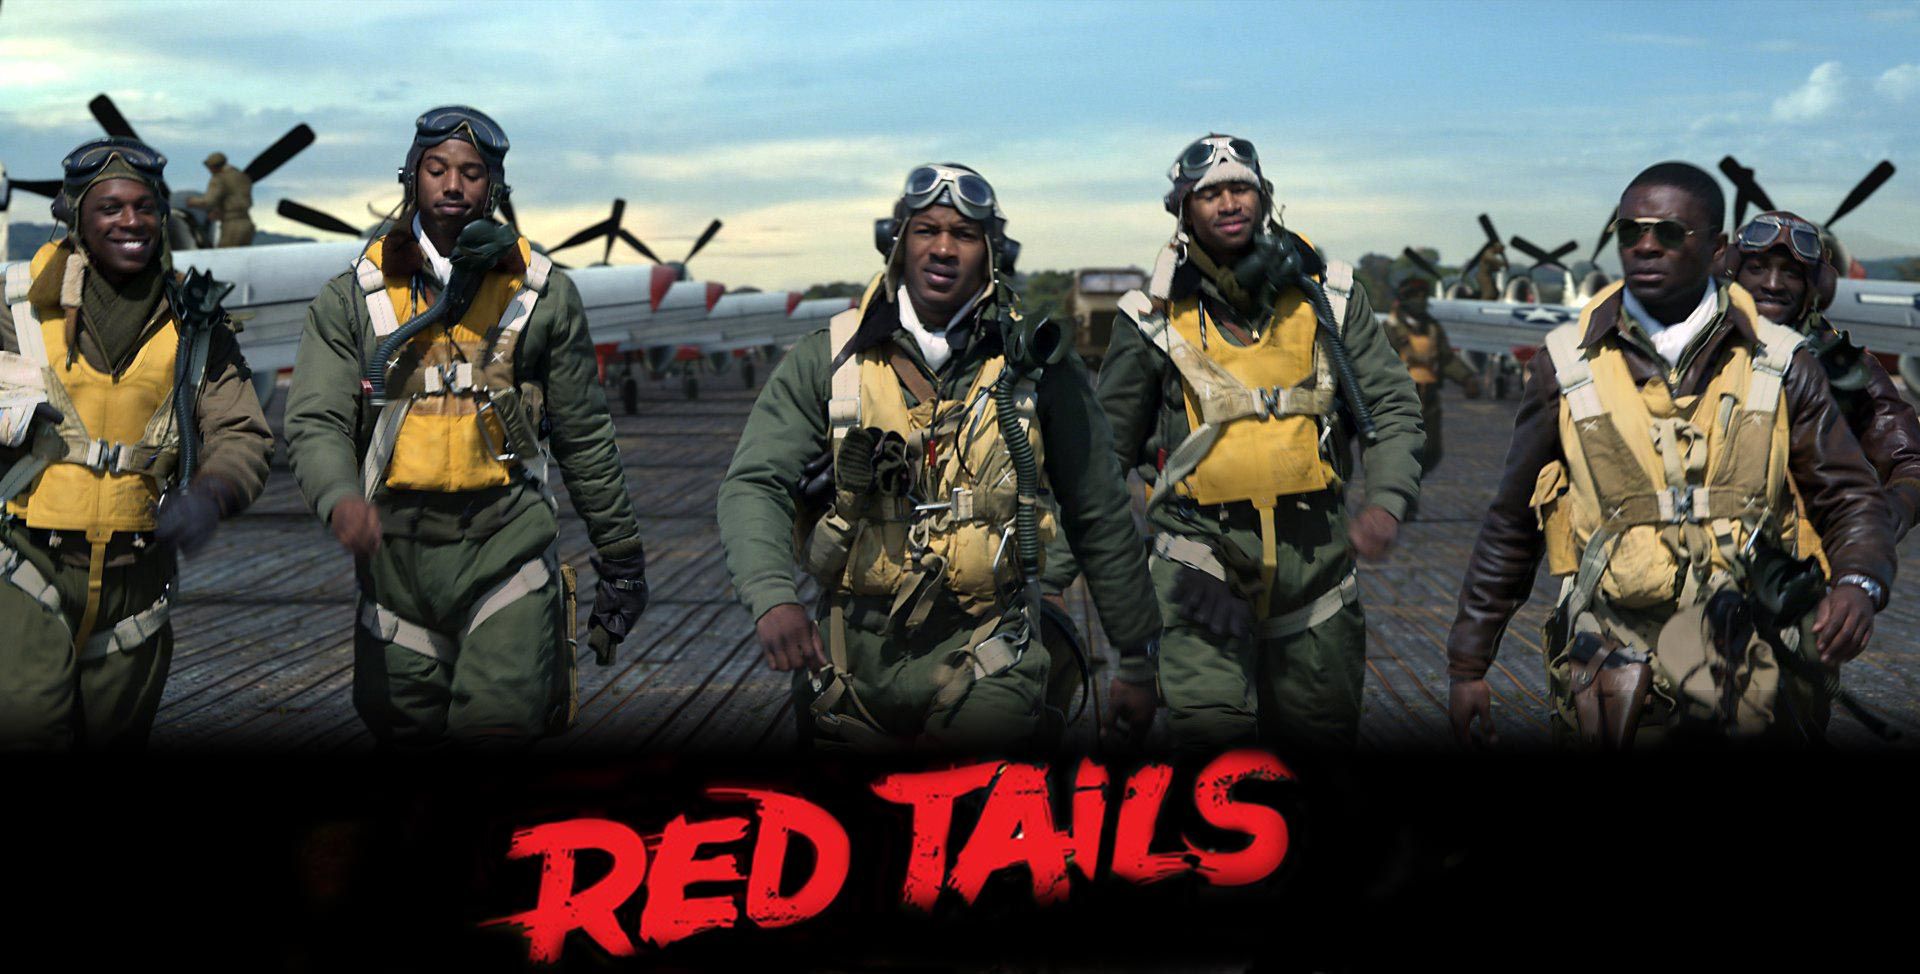 Dallas ISD “Red Tails” Field Trip: $57,000 and No Girls Allowed – Texas Monthly1920 x 974